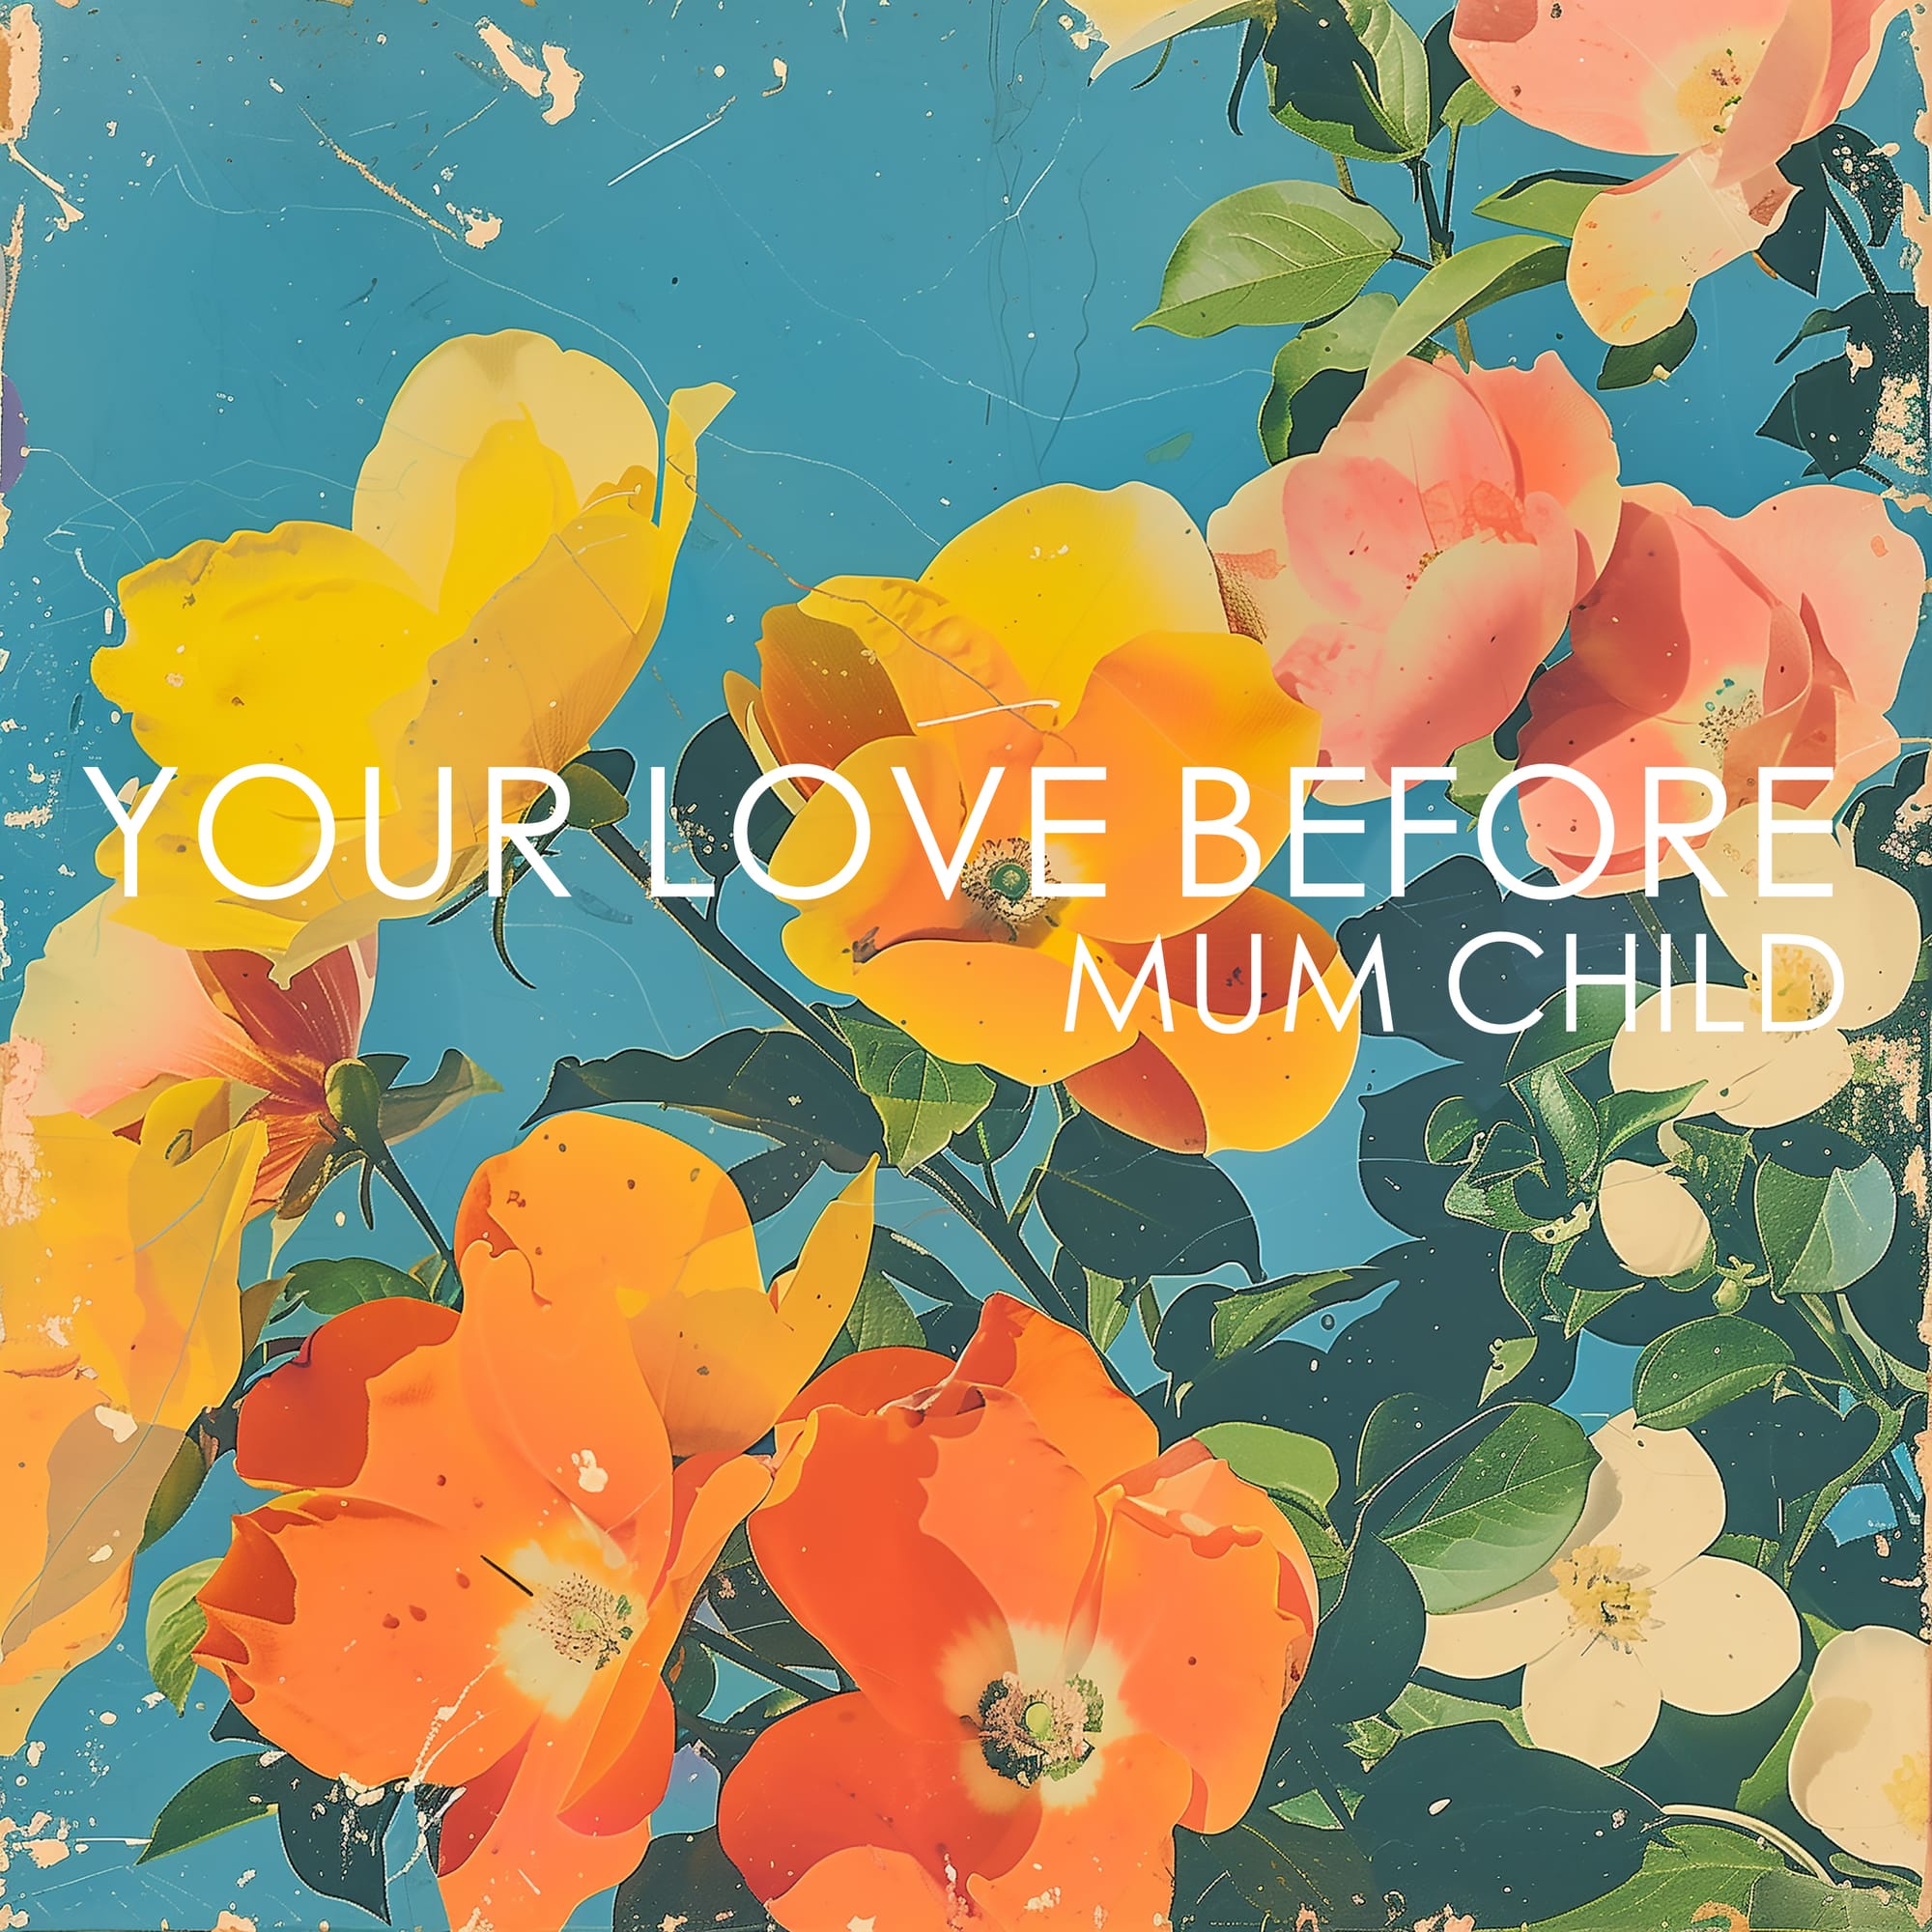 "Your Love Before" by Mum Child